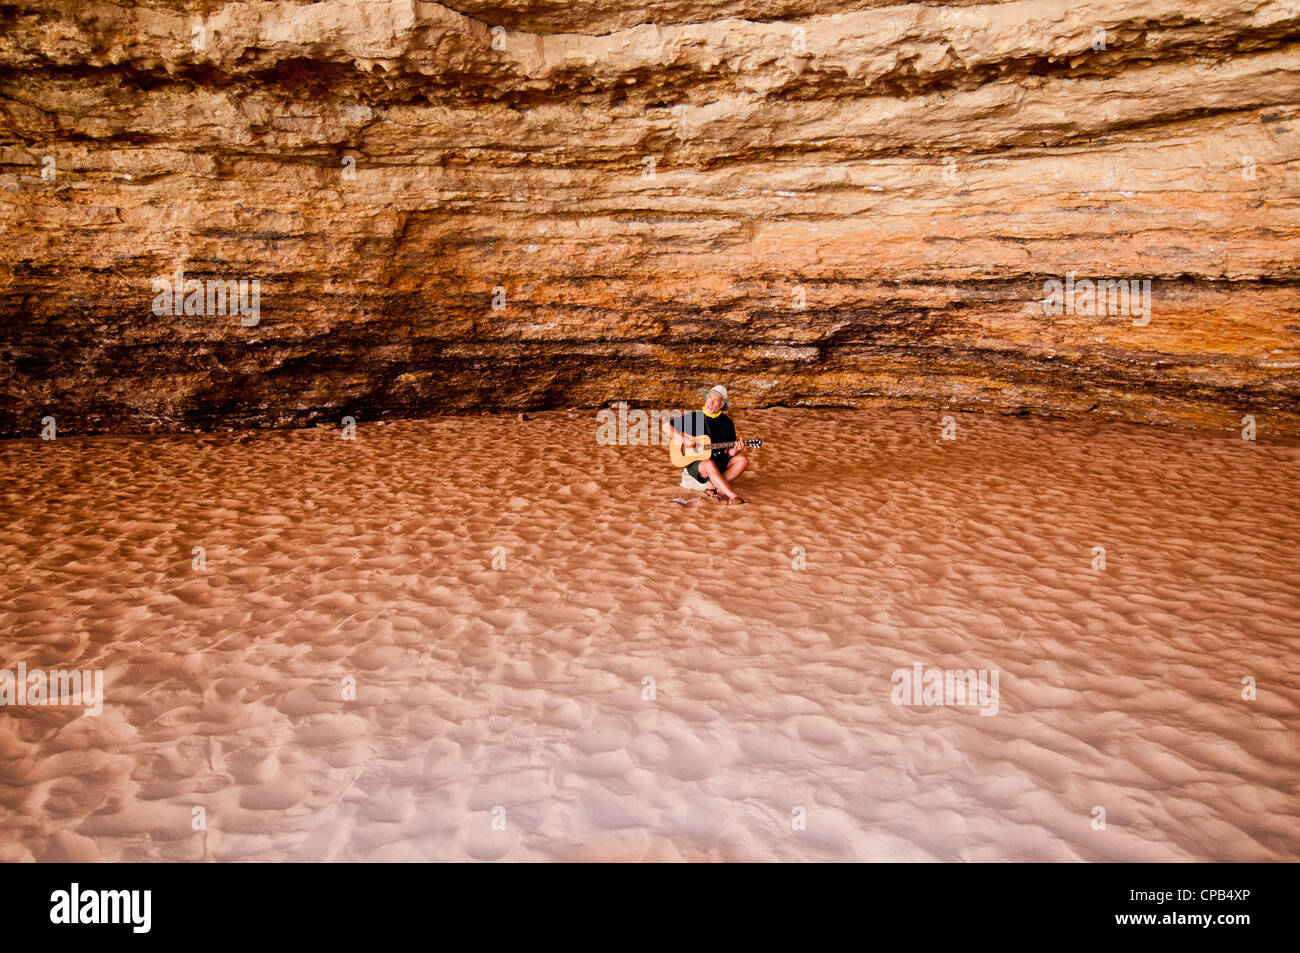 Guitar Player in Redwall Cavern, Grand Canyon National Park Arizona Banque D'Images